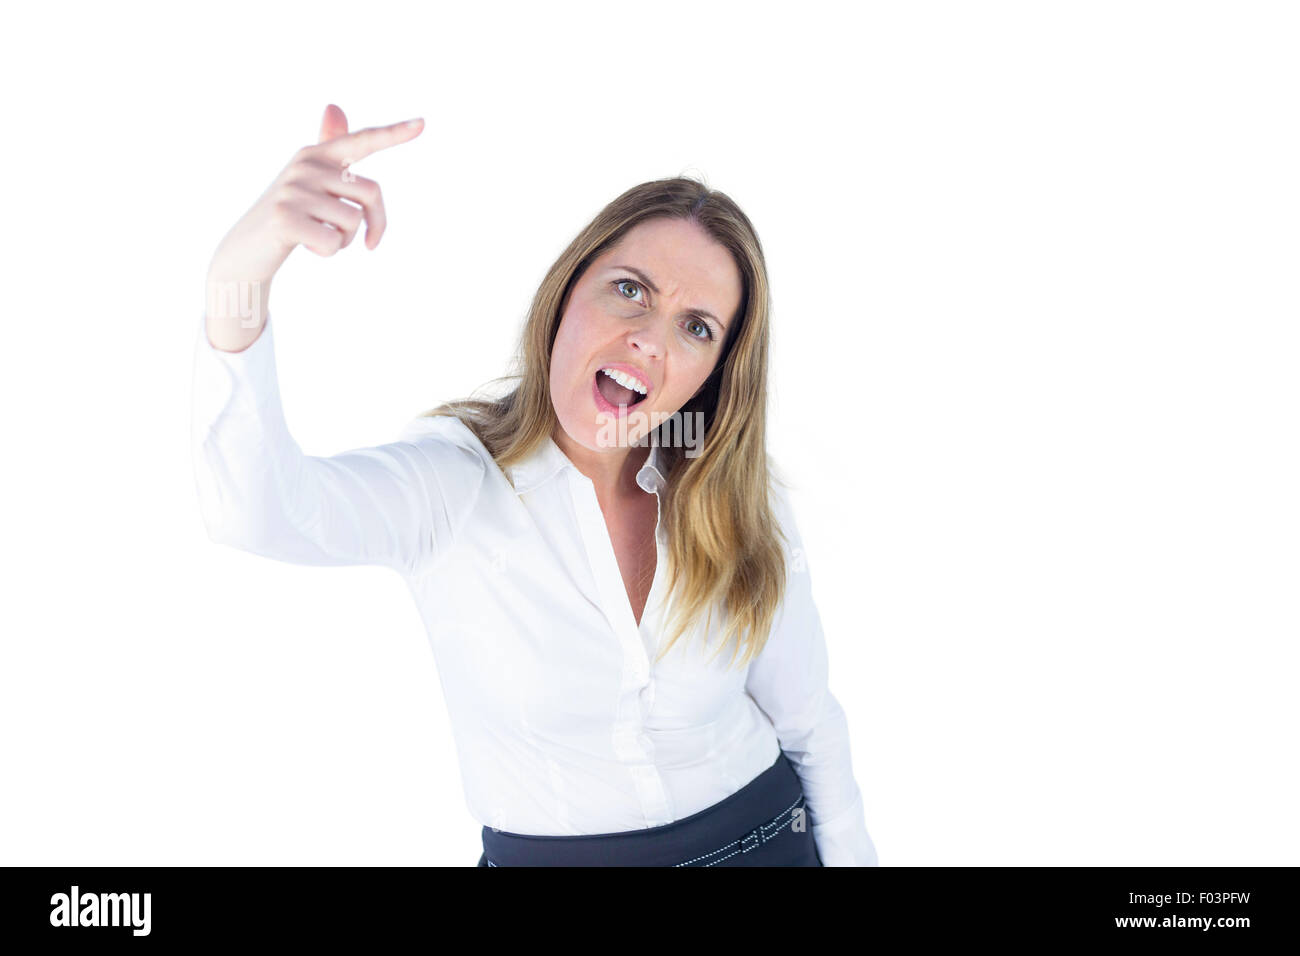 Angry businesswoman gesturing Stock Photo